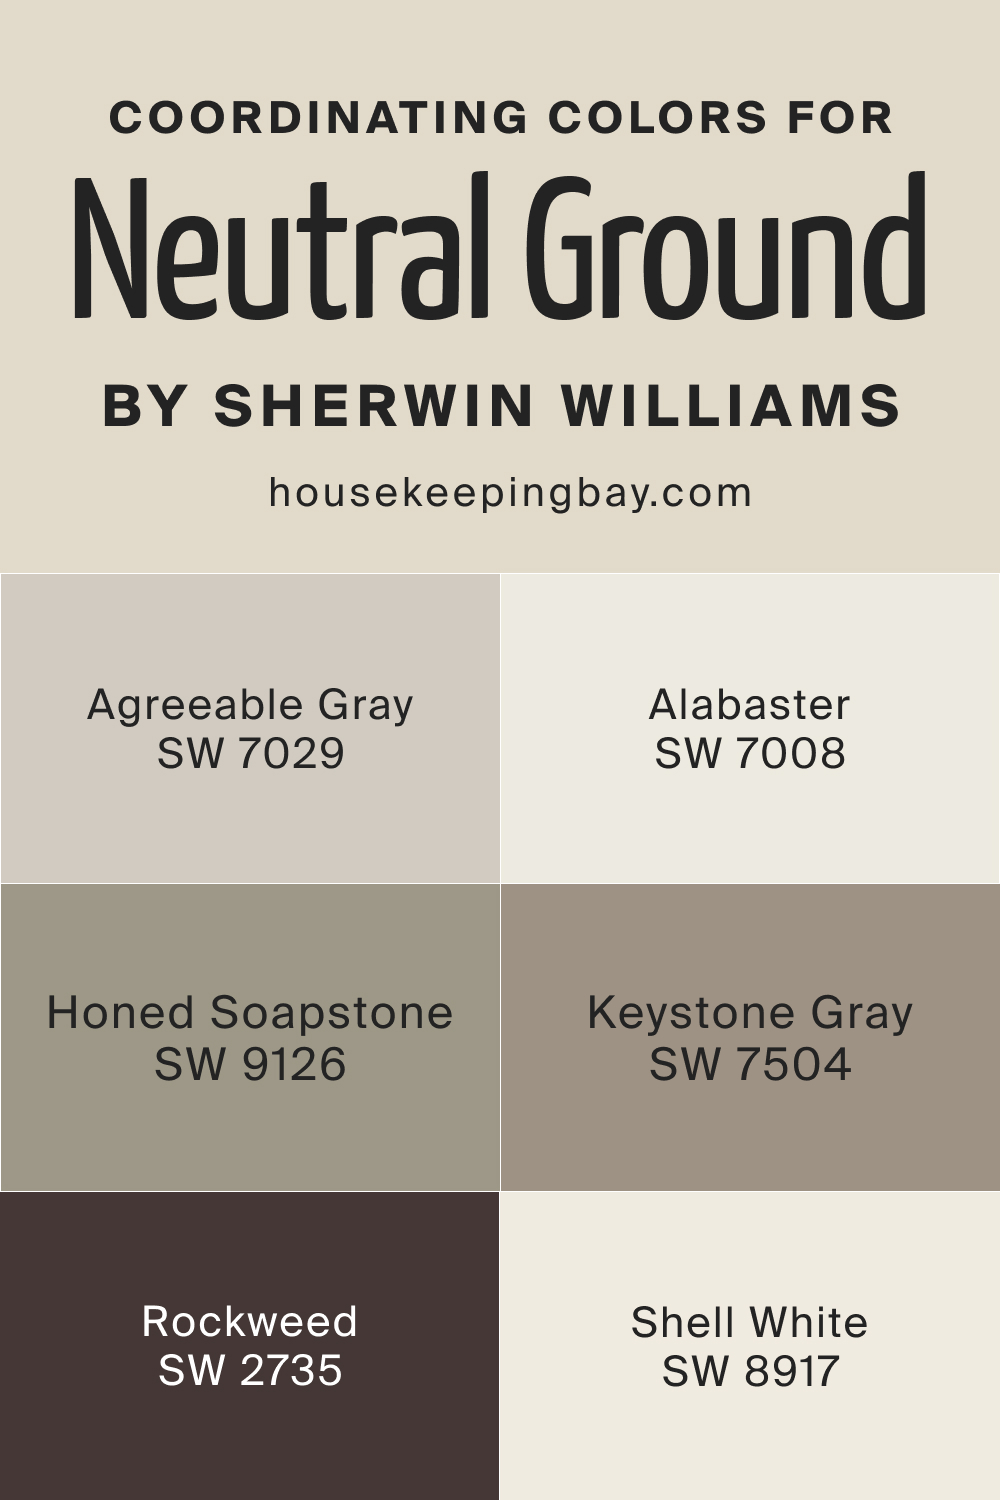 Coordinating Colors for Neutral Ground by Sherwin Williams